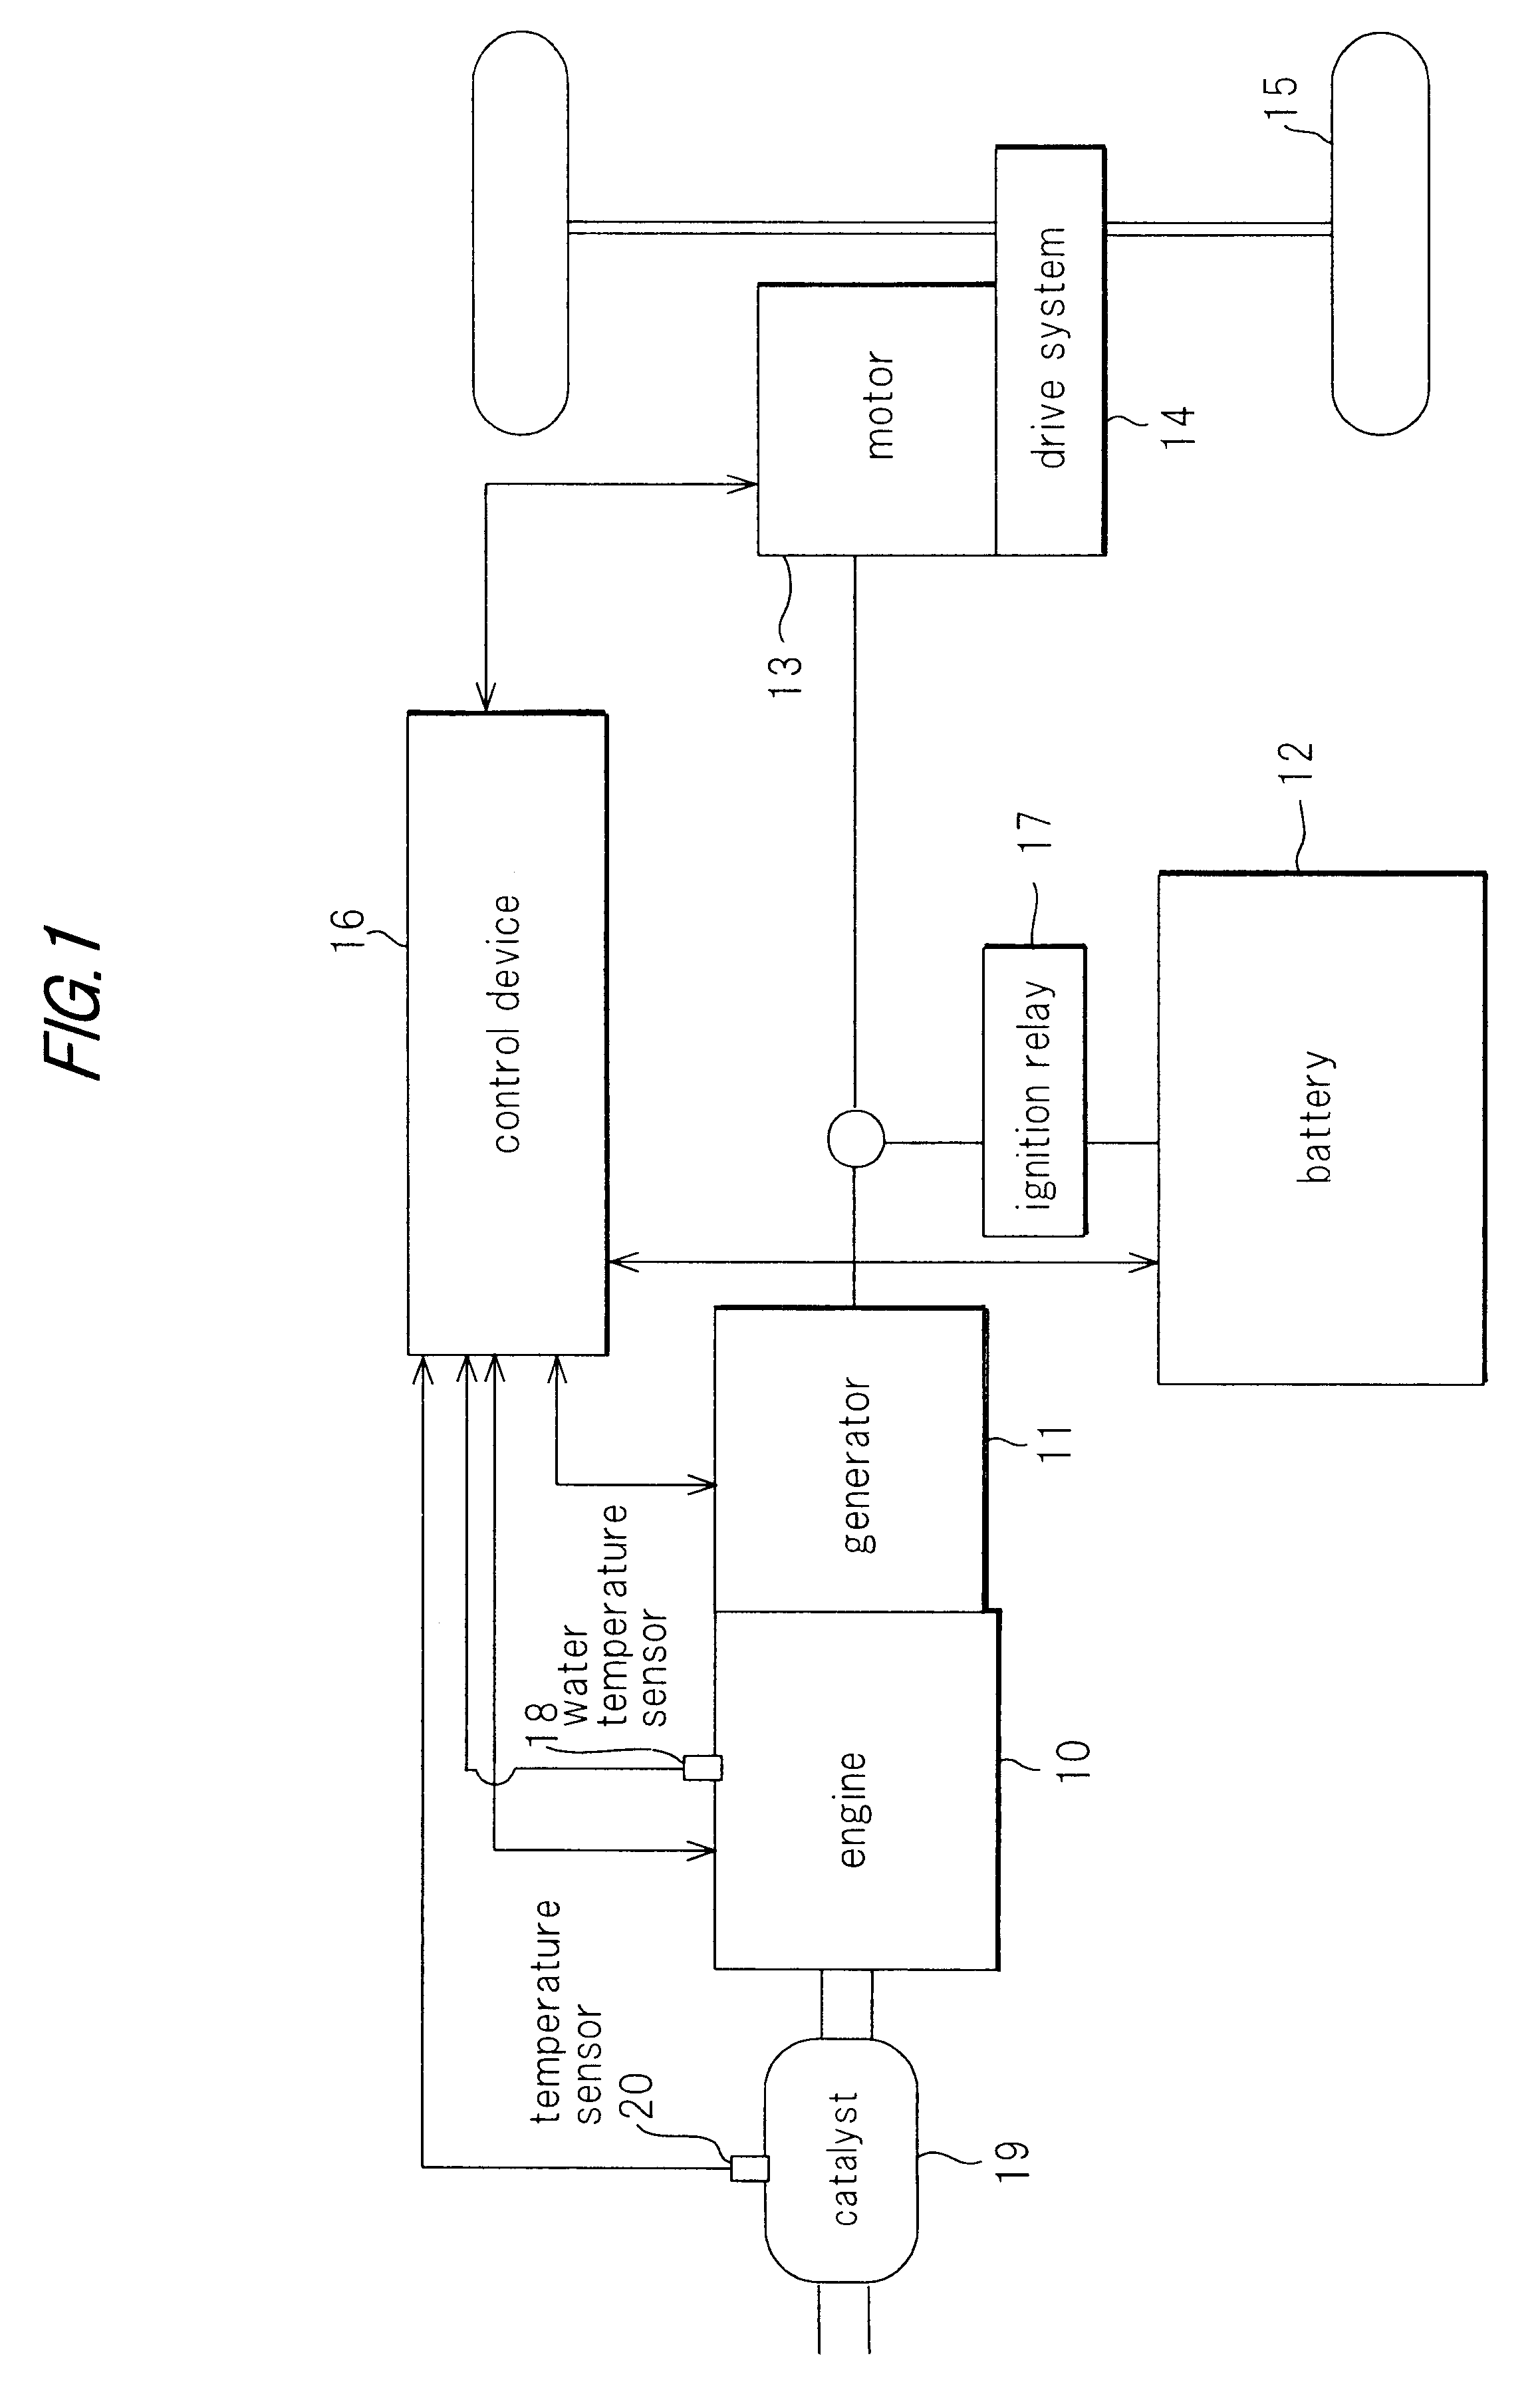 Generator control device for an electrical automobile